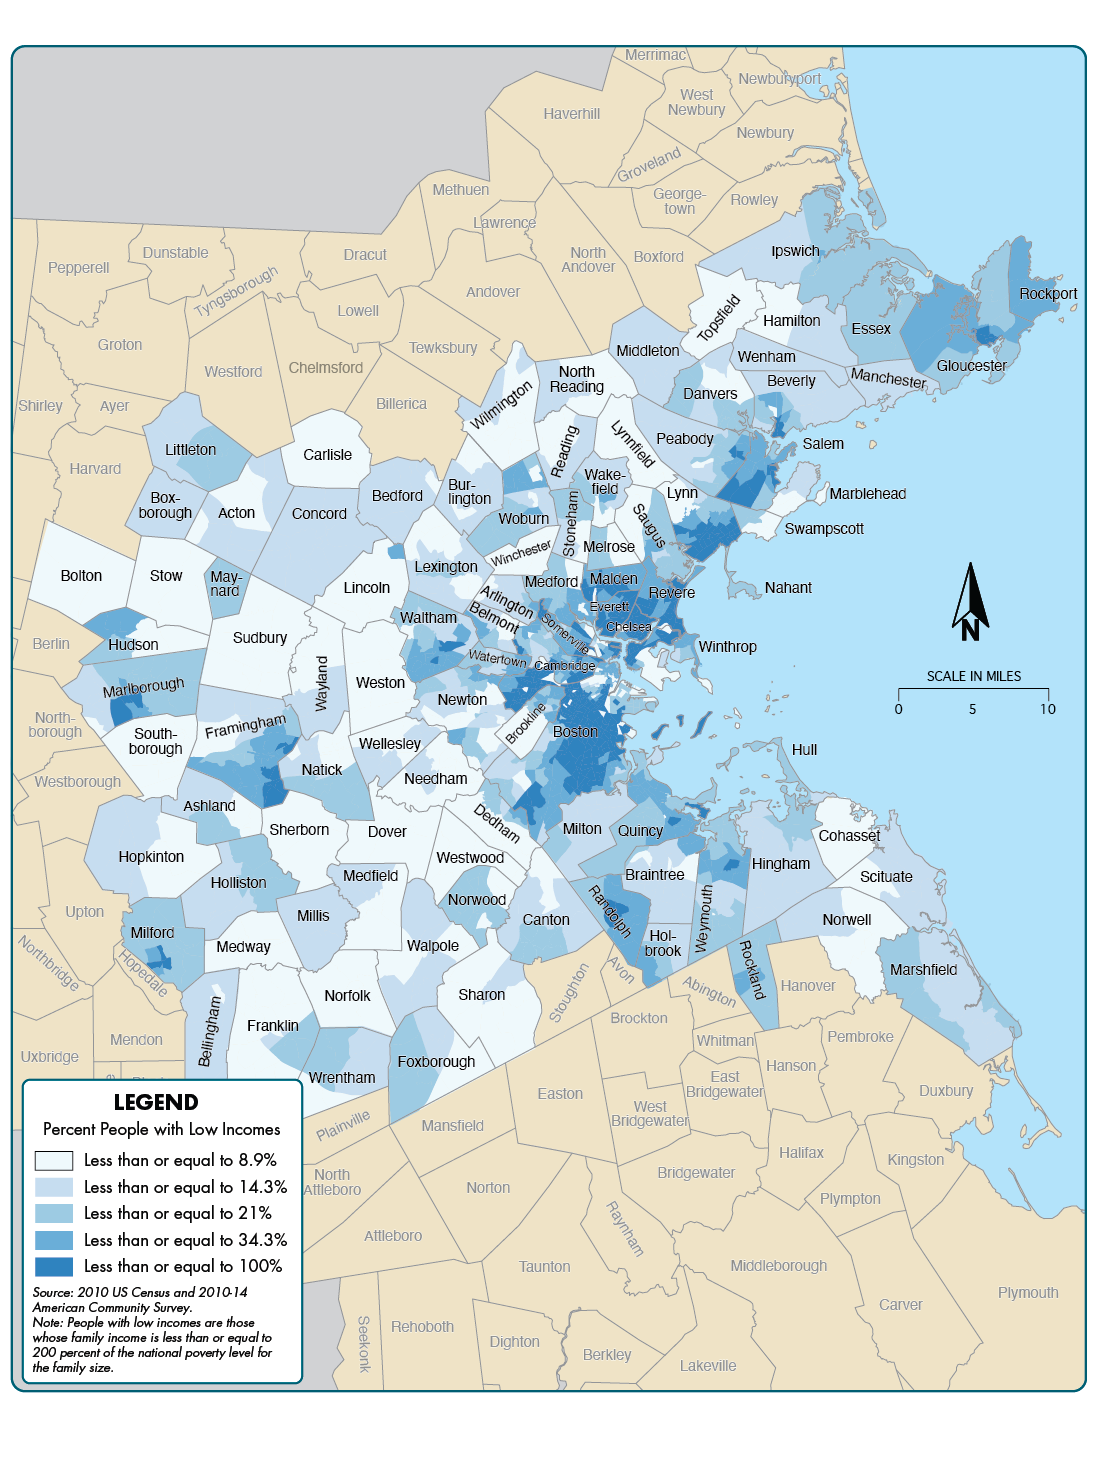 Figure 6-2 is a map showing the percent of the population that identifies as low income across the 97 communities in the Boston region.